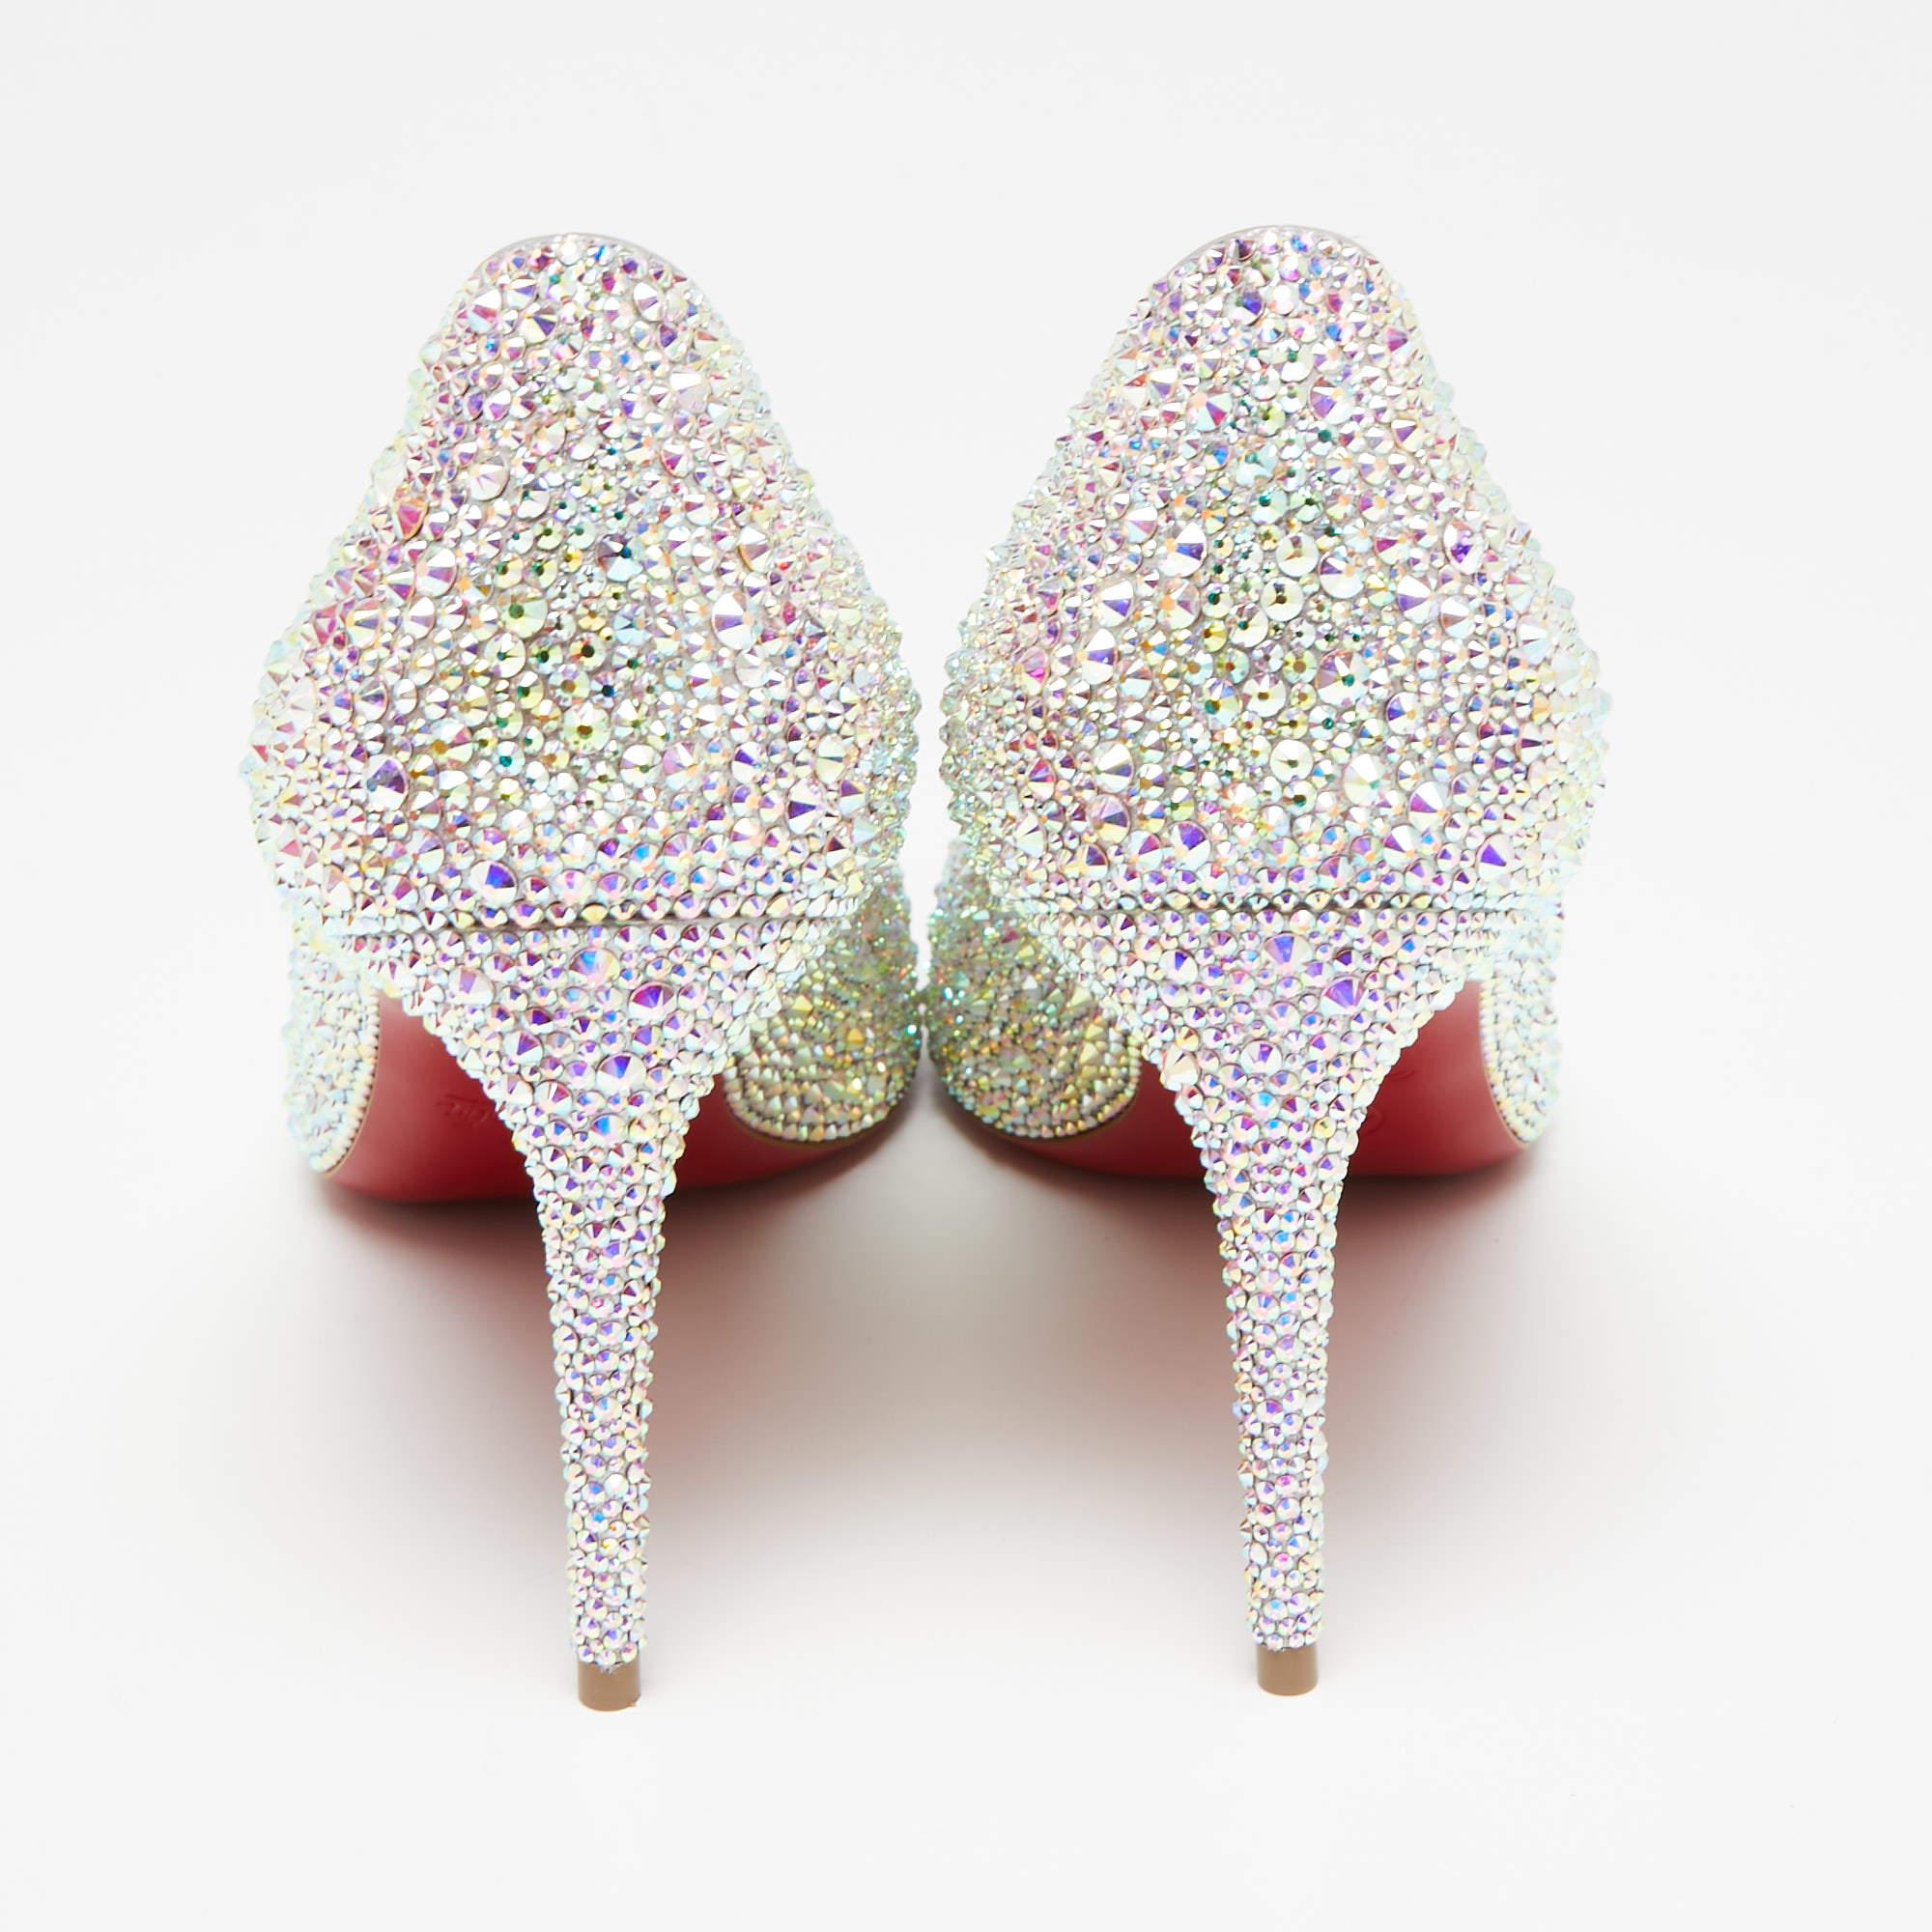 Christian Louboutin Multicolor Leather Strass Degrade Kate Pumps Size 39 1